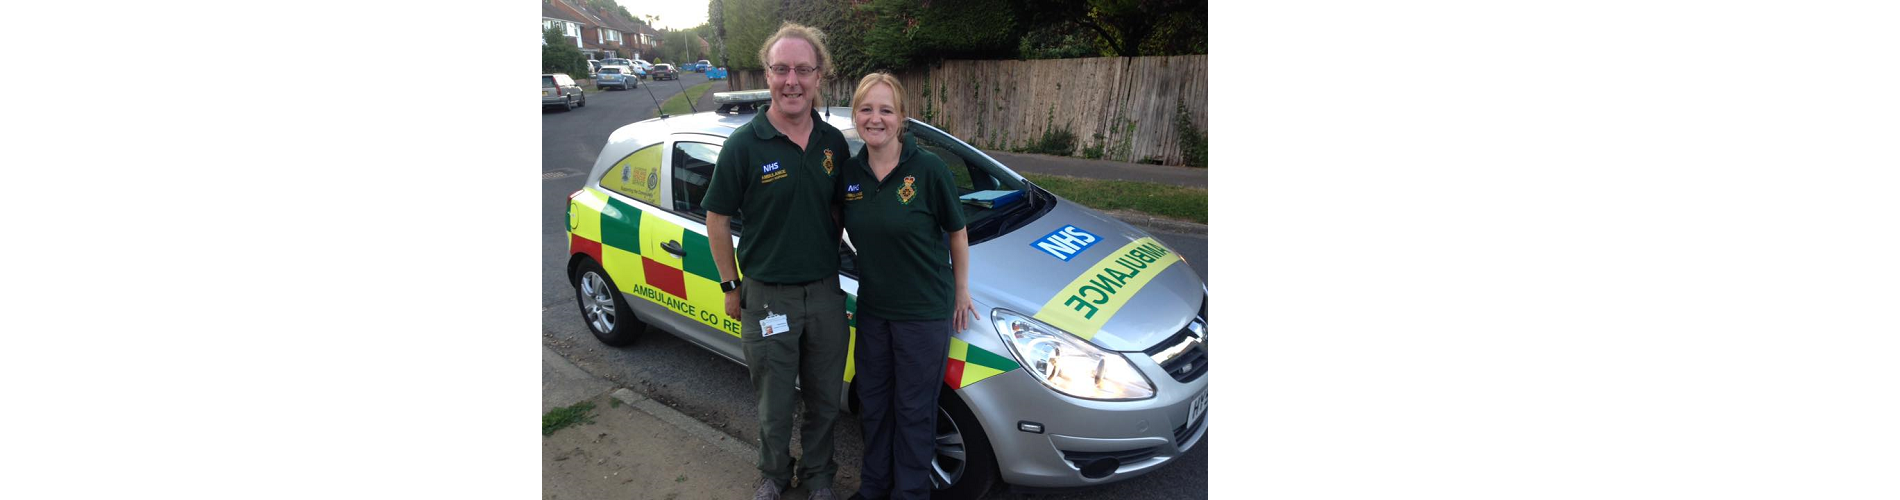 <p>Paul and Kirsty can be found out and about on the Reading Dynamic Response Vehicle each month as part of the extended team of CFR volunteers from across the Reading area who provide their time to man this vehicle.  The DRV carries additional clinical resources to incidents which aren’t available […]</p>
